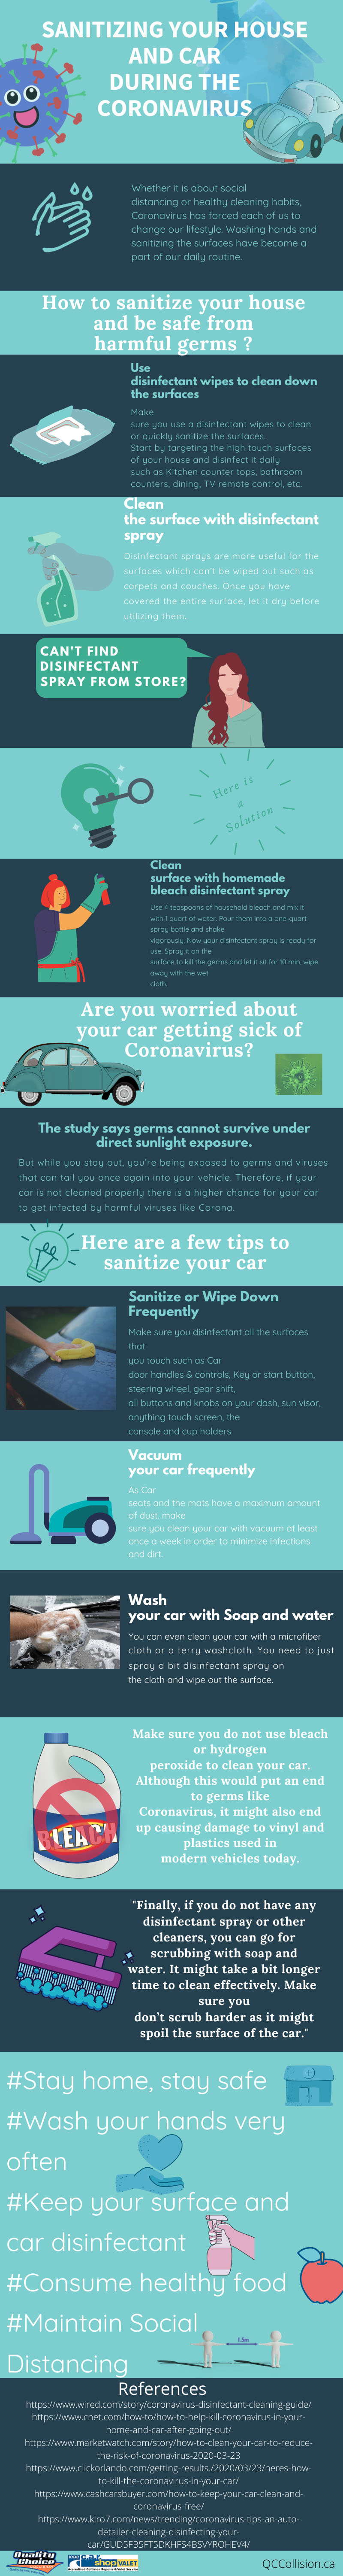 How To Keep Your House & Car Sanitized During Coronavirus - Infographic